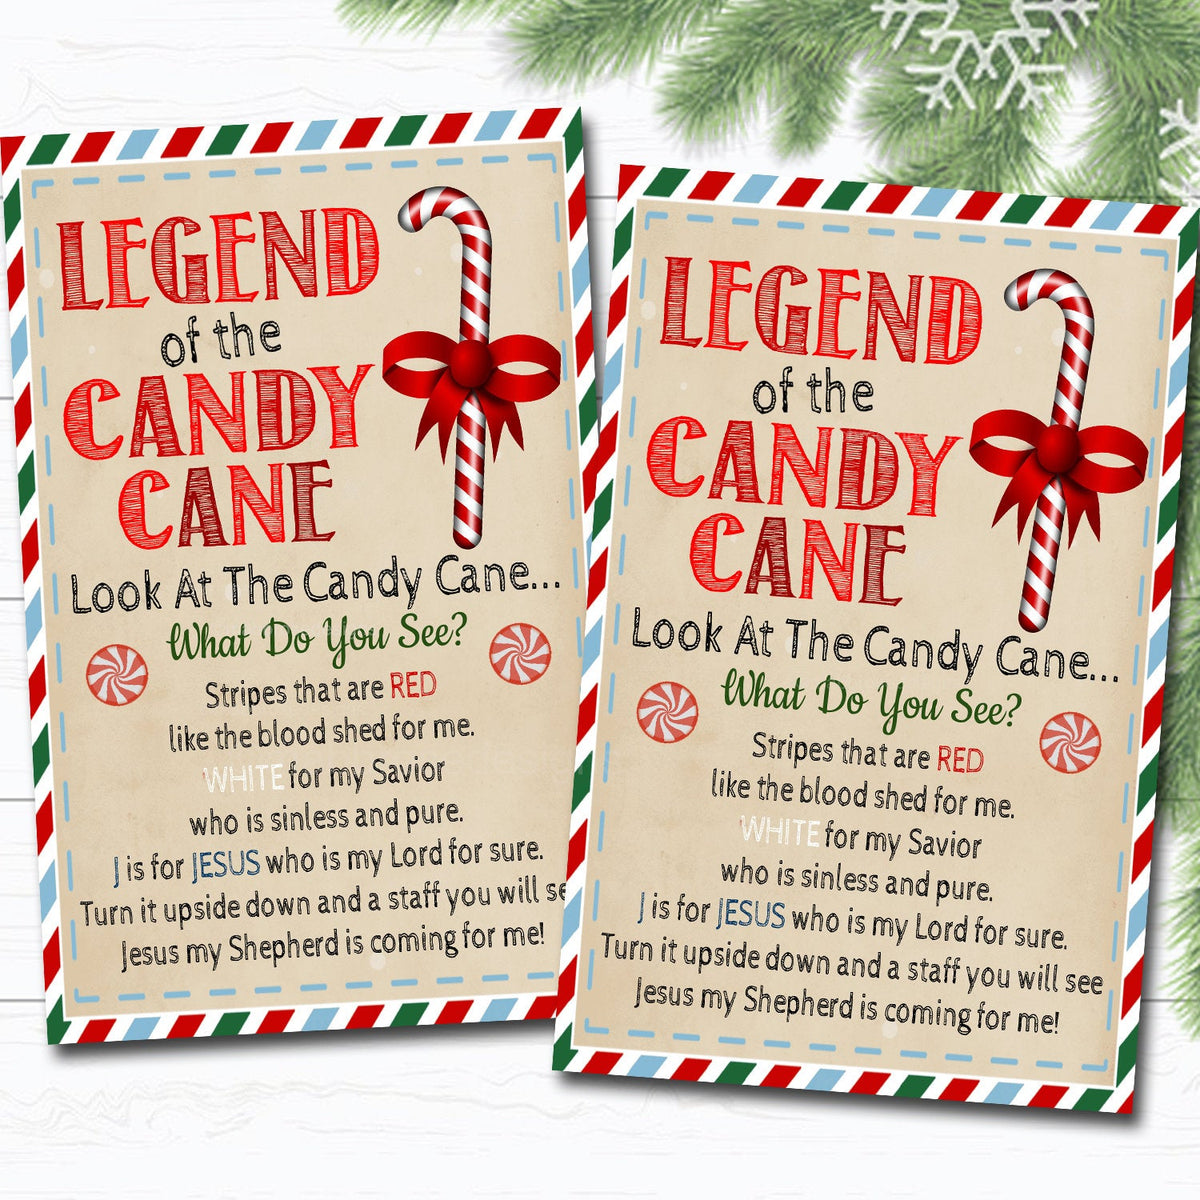 legend-of-the-candy-cane-tags-tidylady-printables